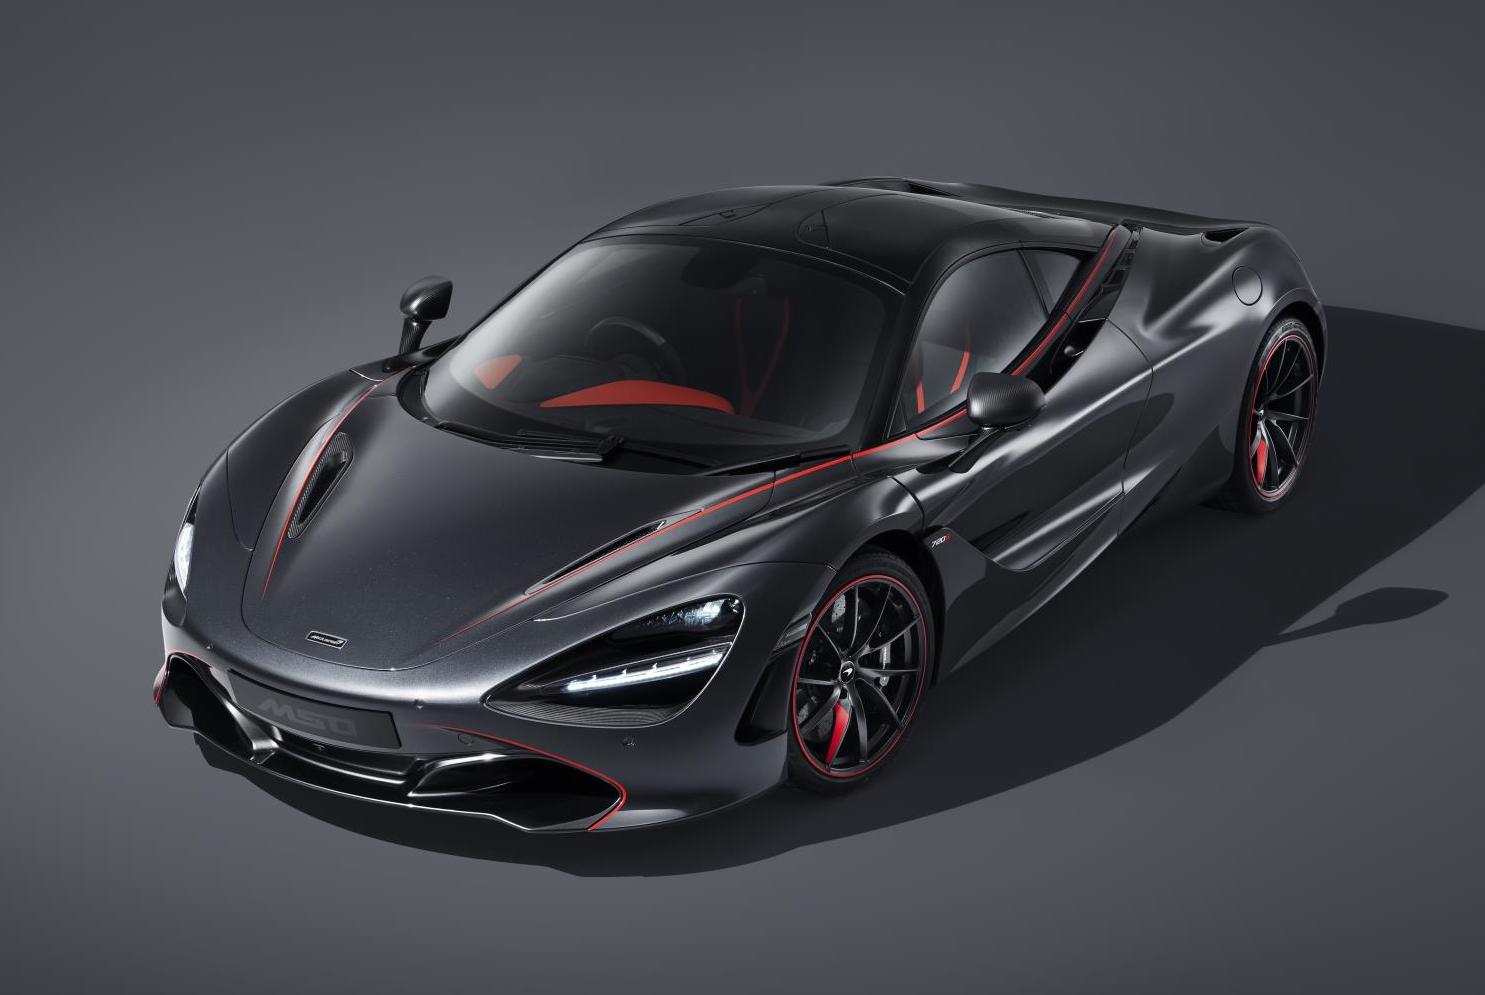 McLaren 720S Stealth theme announced by MSO